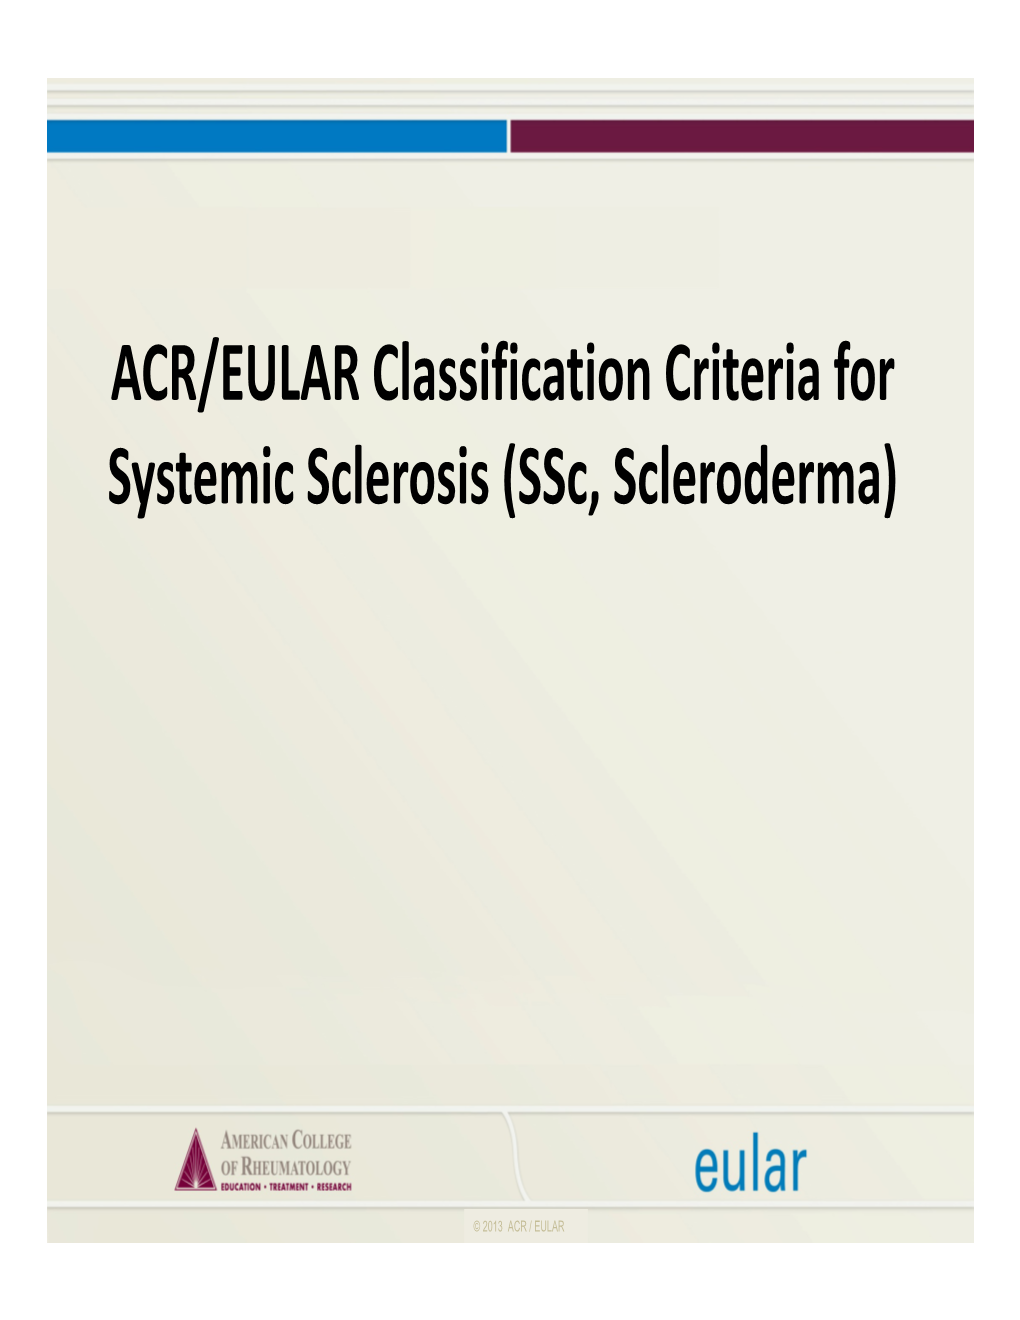 ACR/EULAR Classification Criteria for Systemic Sclerosis (Ssc, Scleroderma)